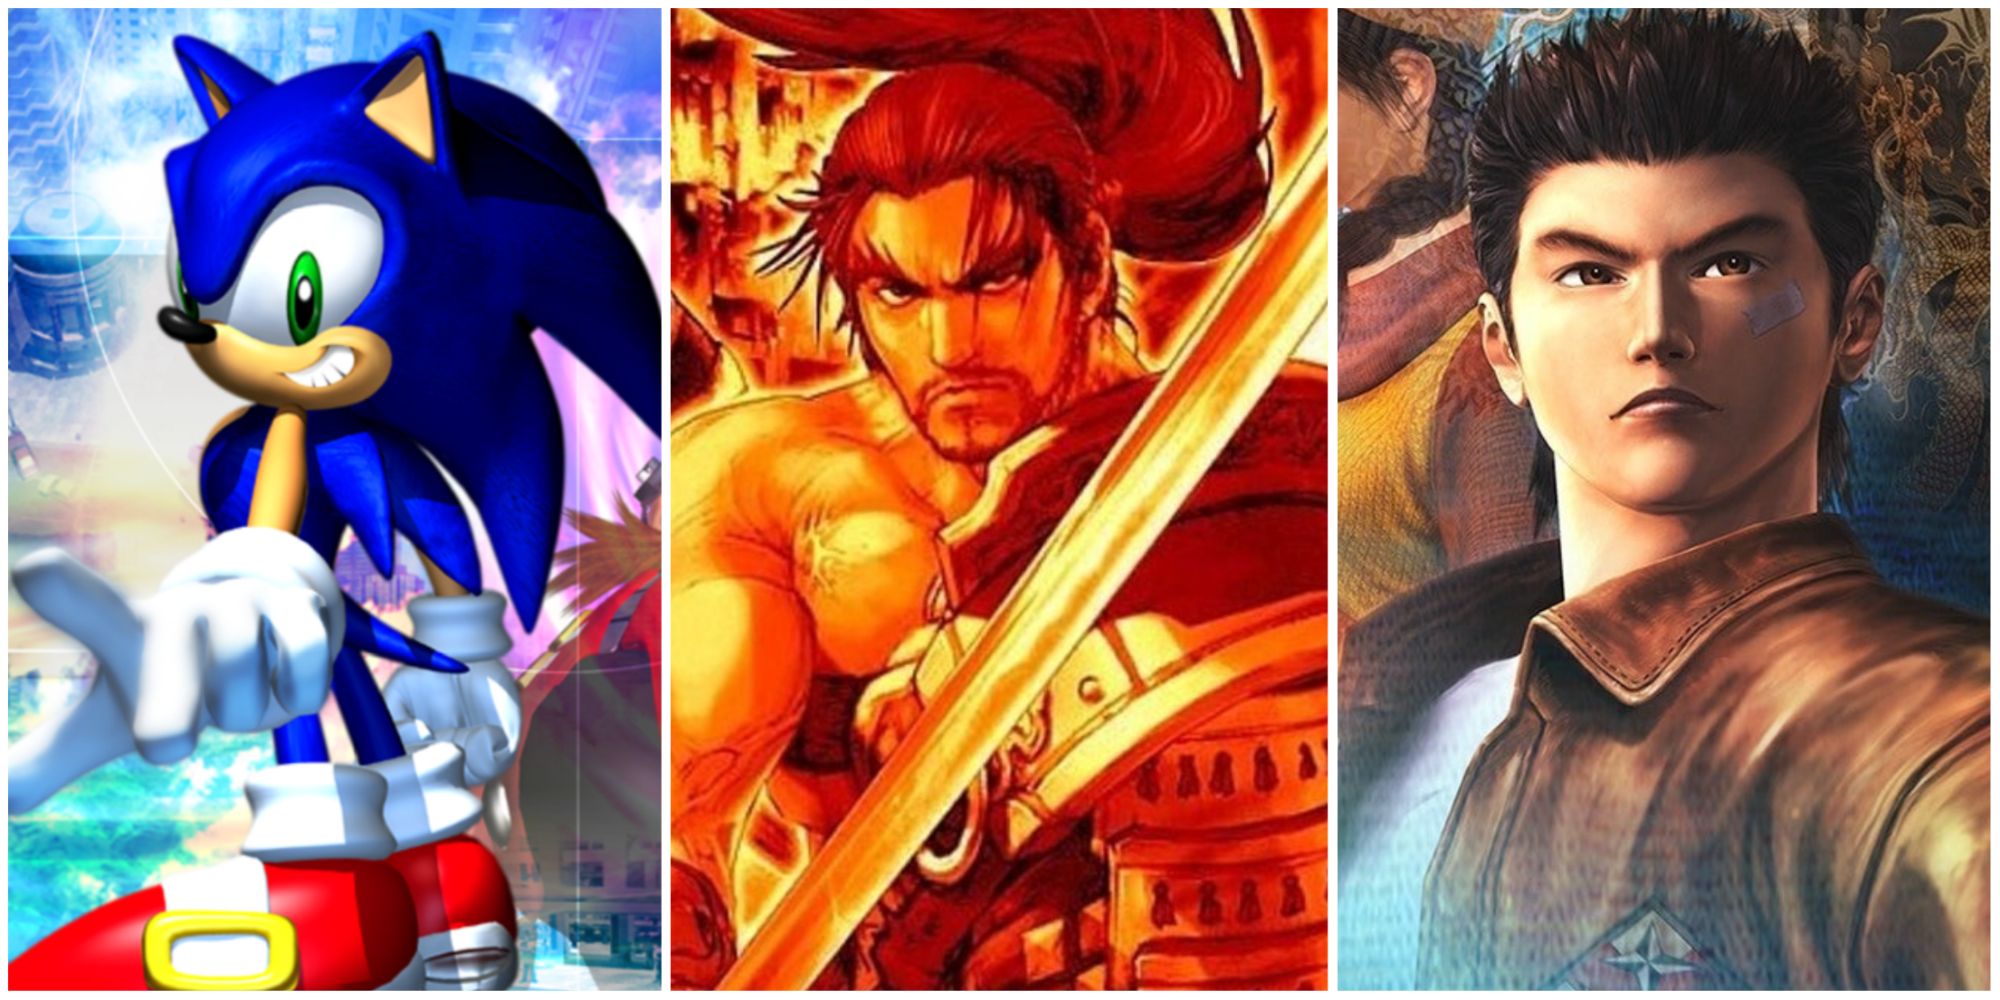 Sega Dreamcast Games With Graphics That Have Aged The Best